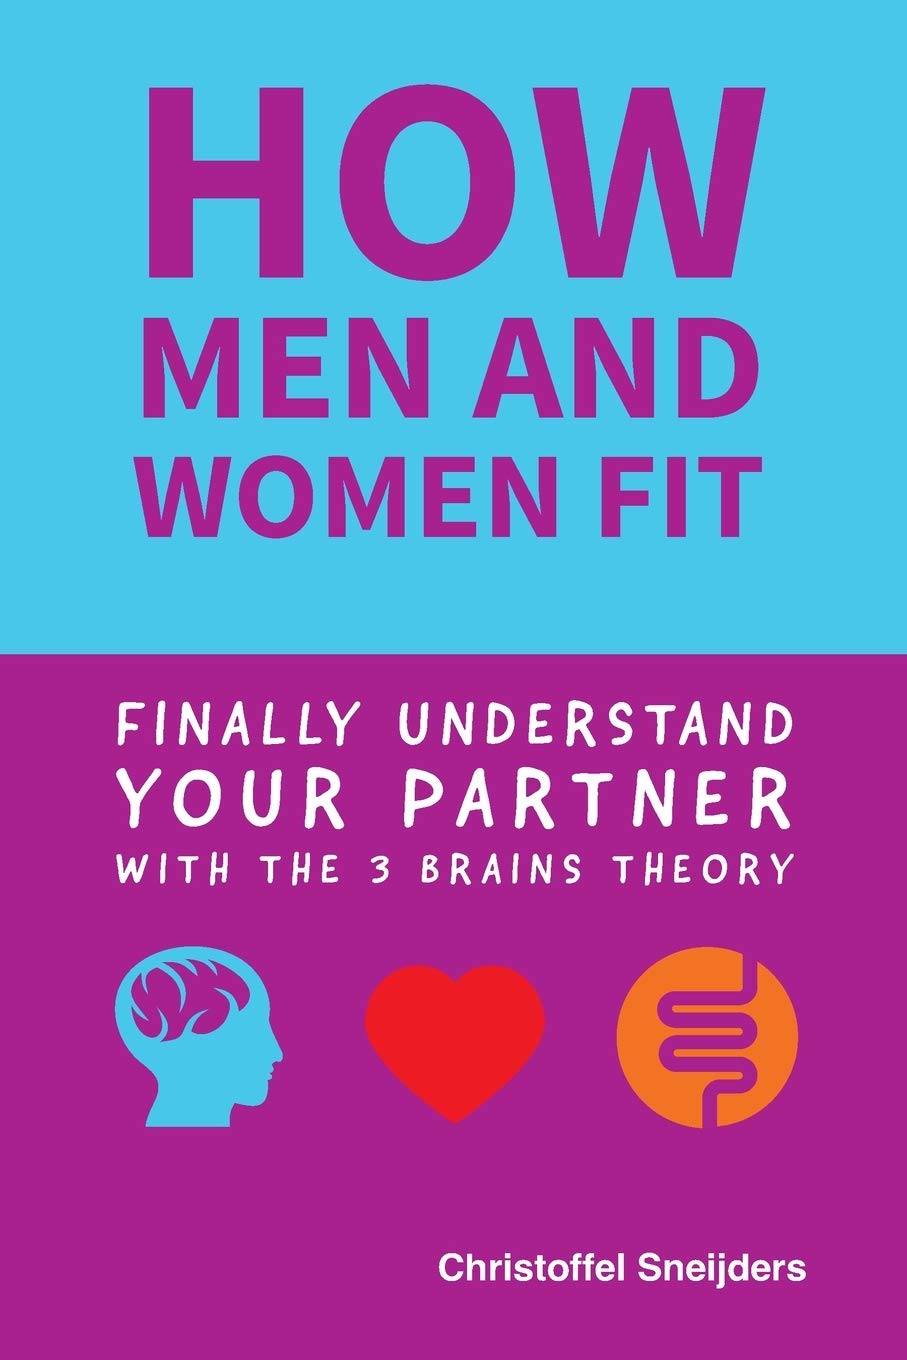 How men and women fit